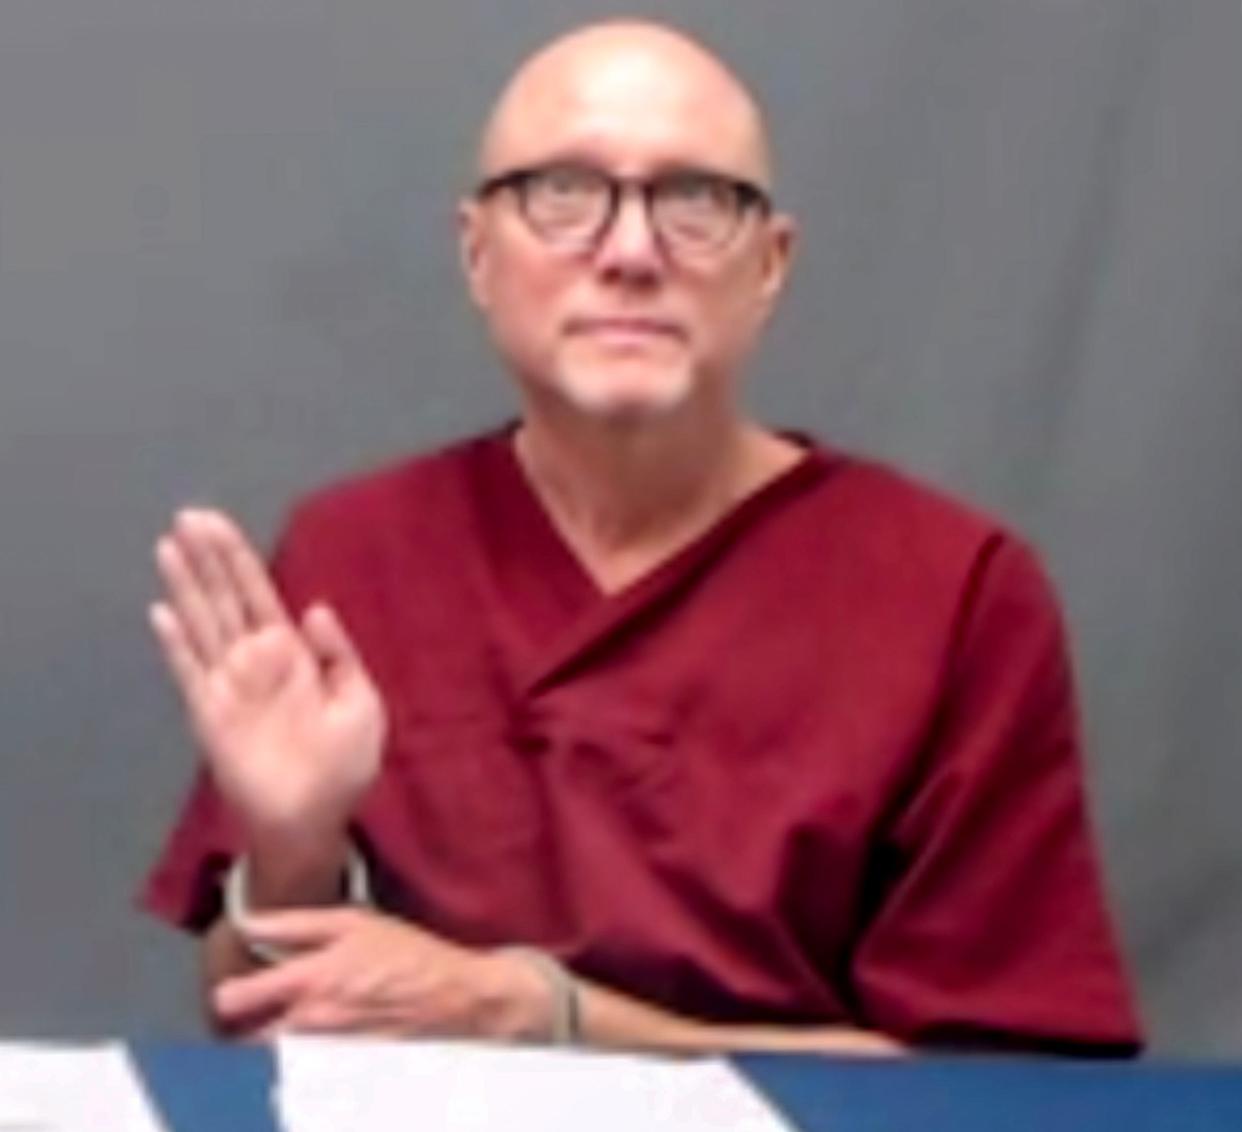 Death row inmate Phillip Hancock swears to tell the truth Wednesday in his video appearance before the Oklahoma Pardon and Parole Board.